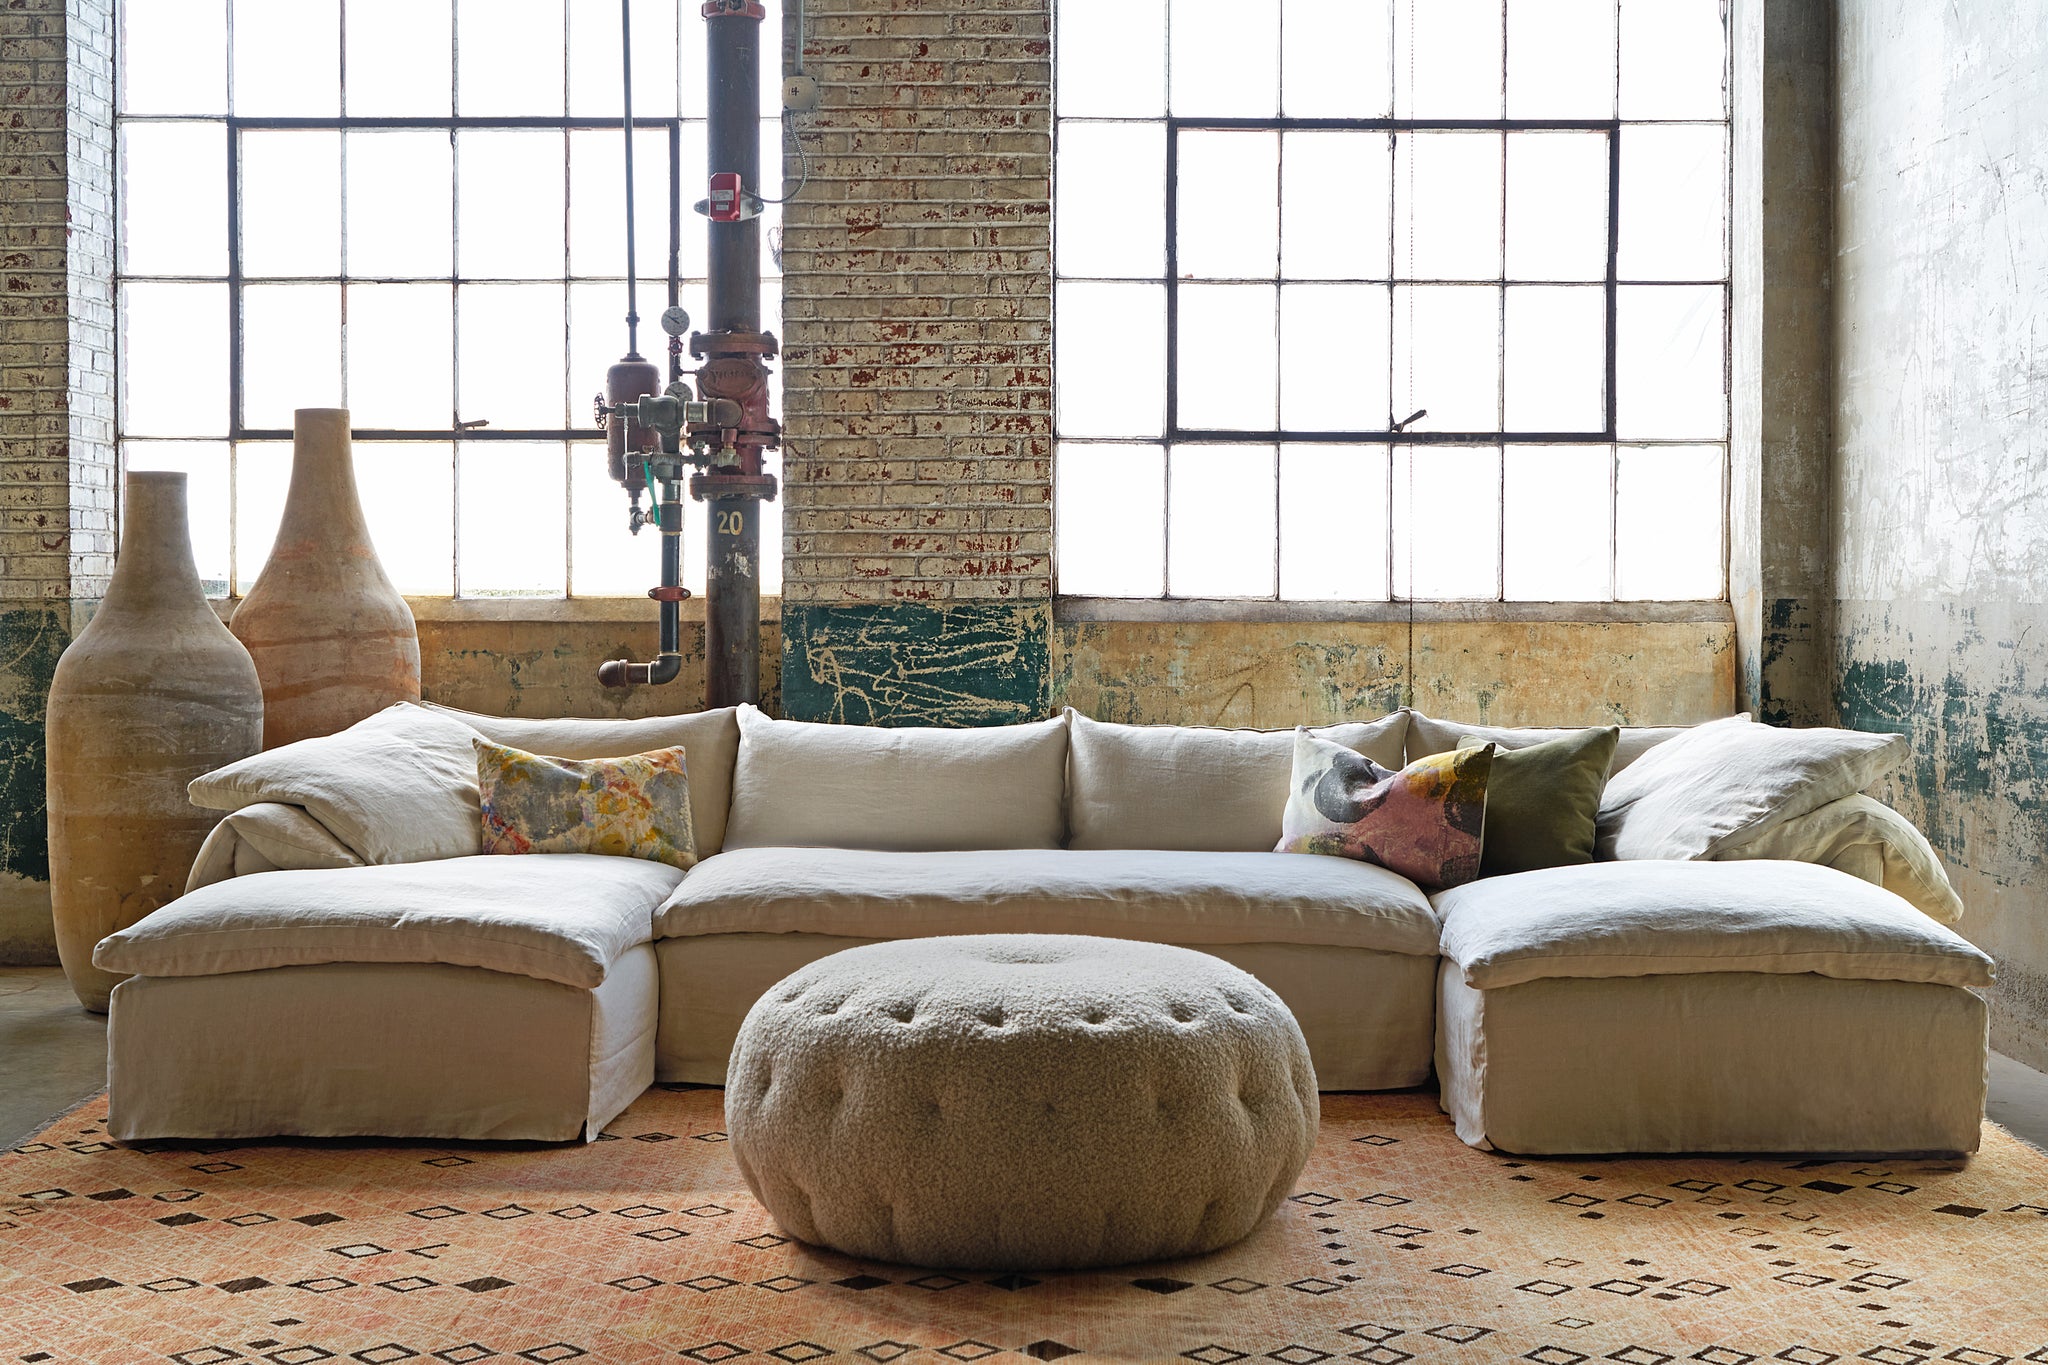  Large 3 piece sectional in front of windows with a pouf in front. Photographed in Knobby Mineral. 